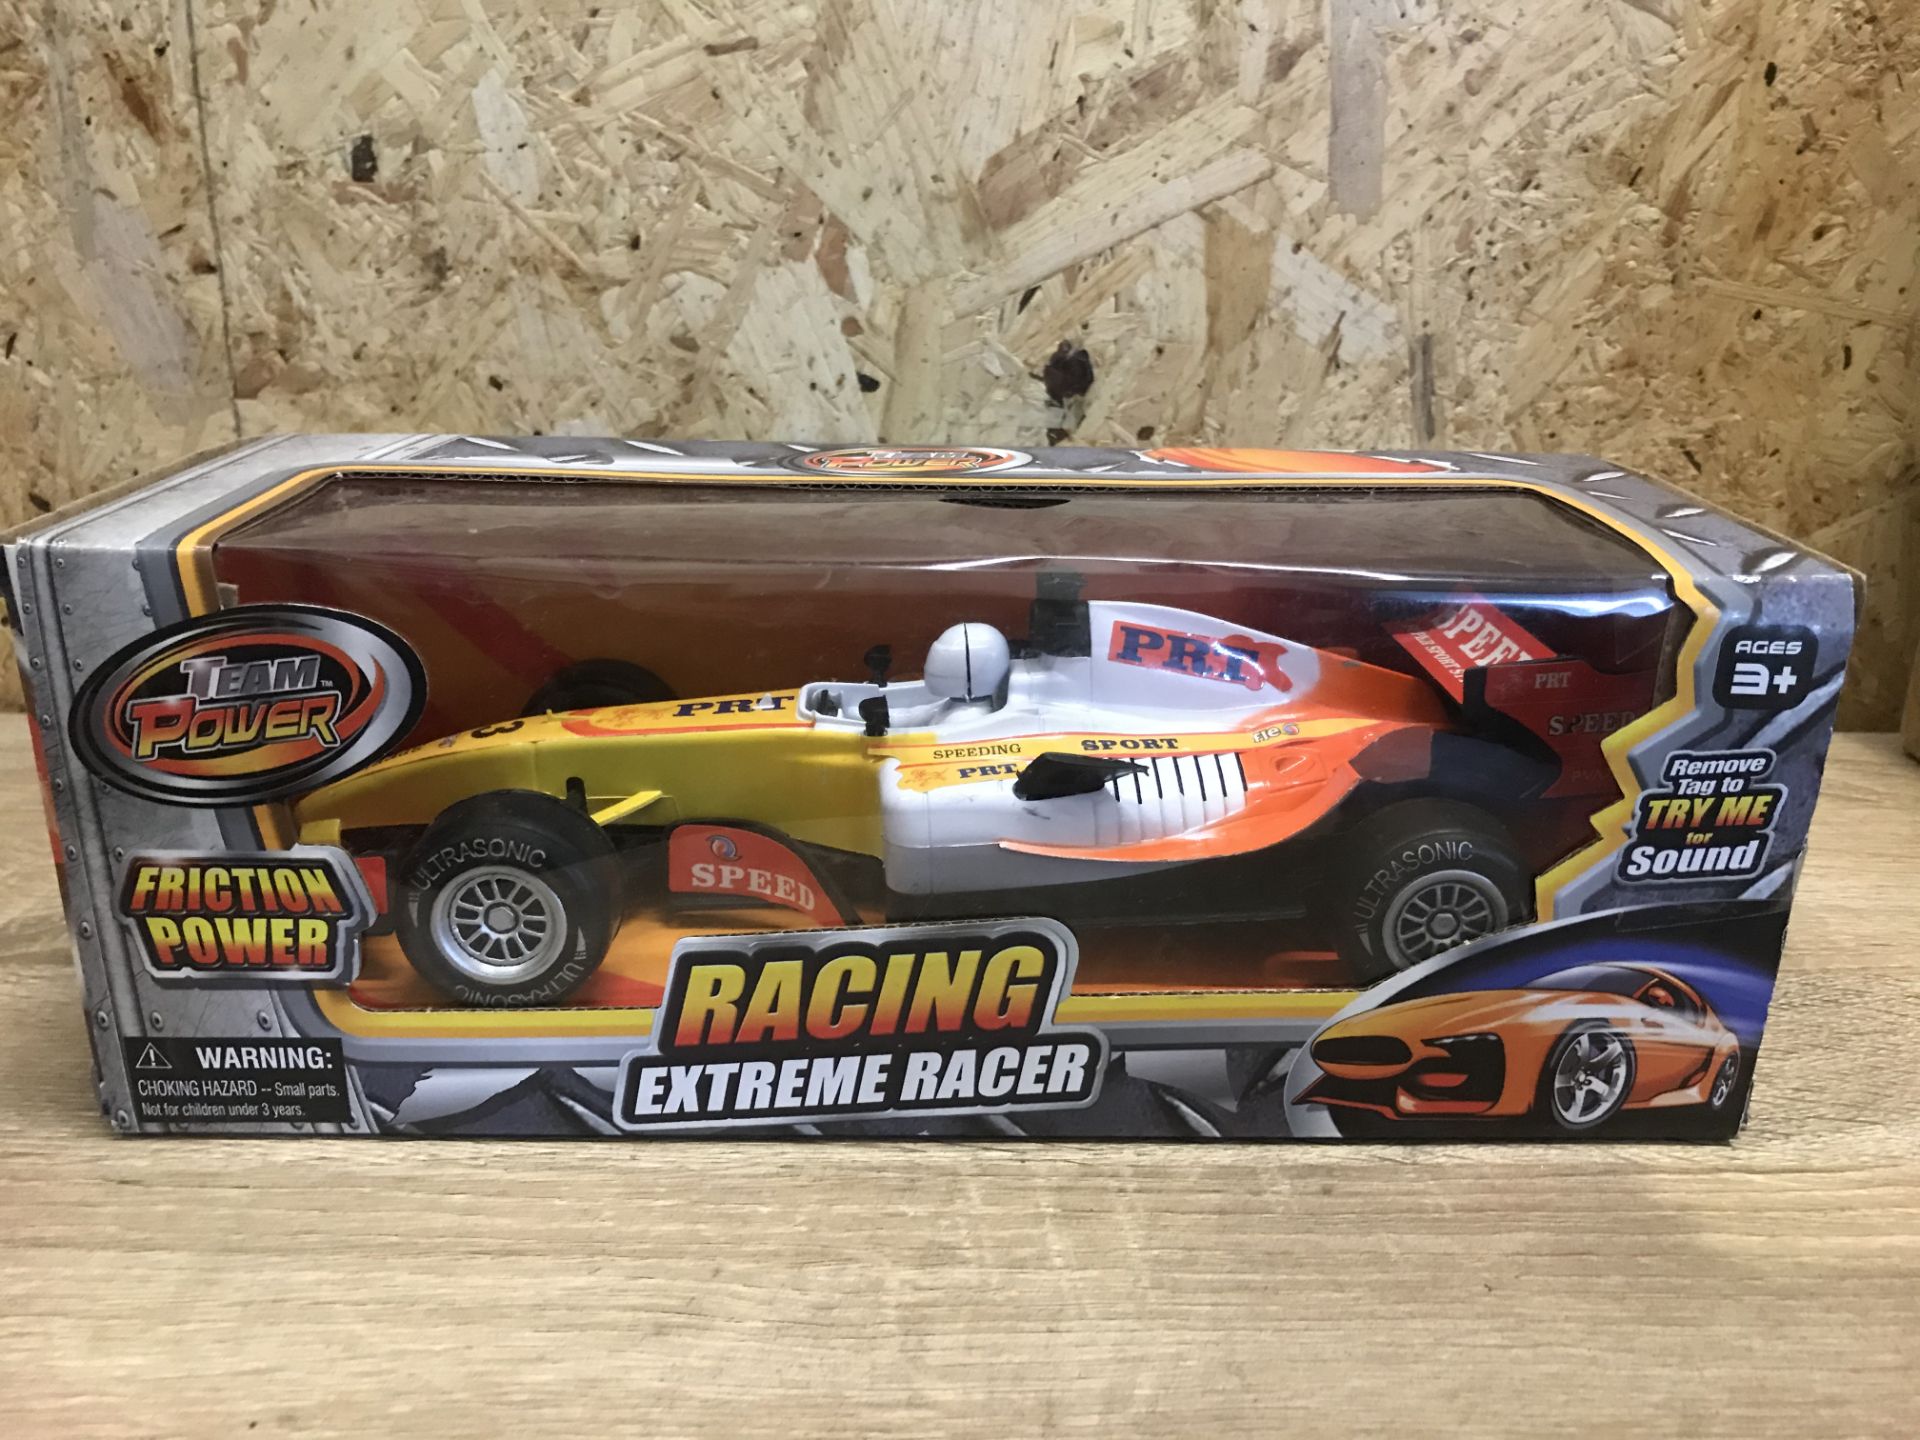 4 X BRAND NEW BOXED TEAM POWER EXTREME RACER - FRICTION POWER WITH SOUNDS. RRP £14.99 EACH